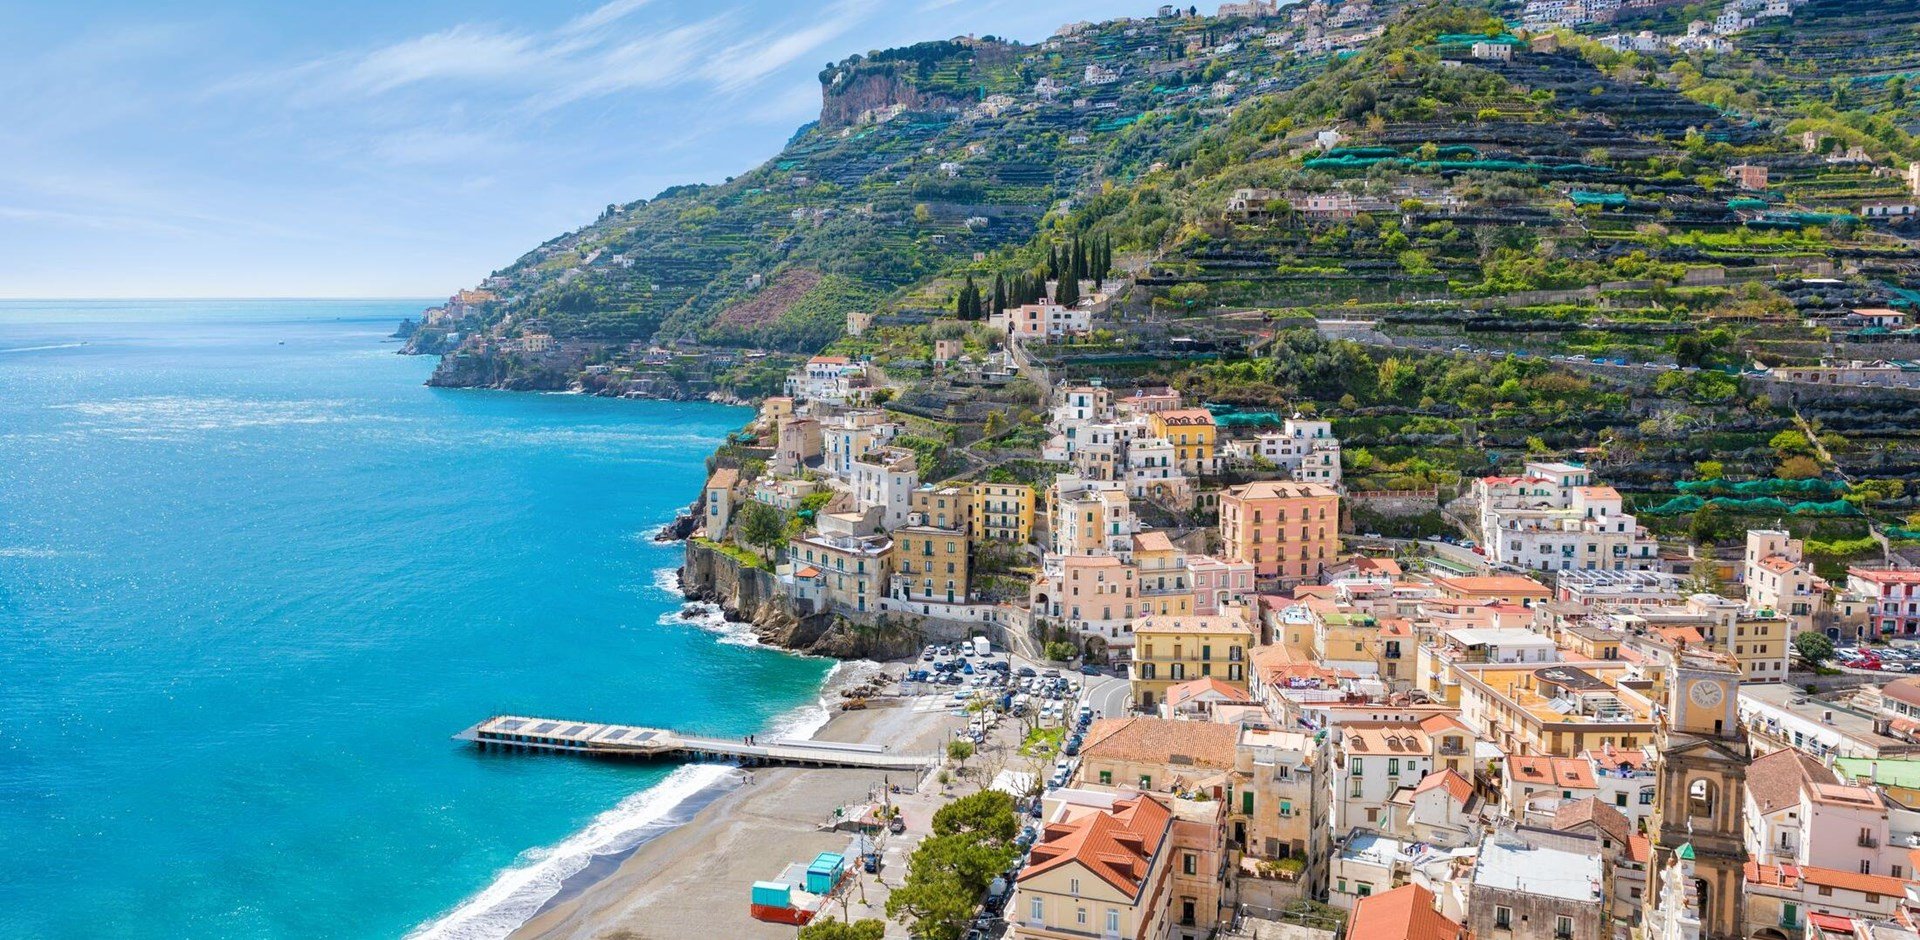 Aerial view of Minori, seaside town at centre of Amalfi Coast, province of Salerno, in Campania region of Southern Italy.